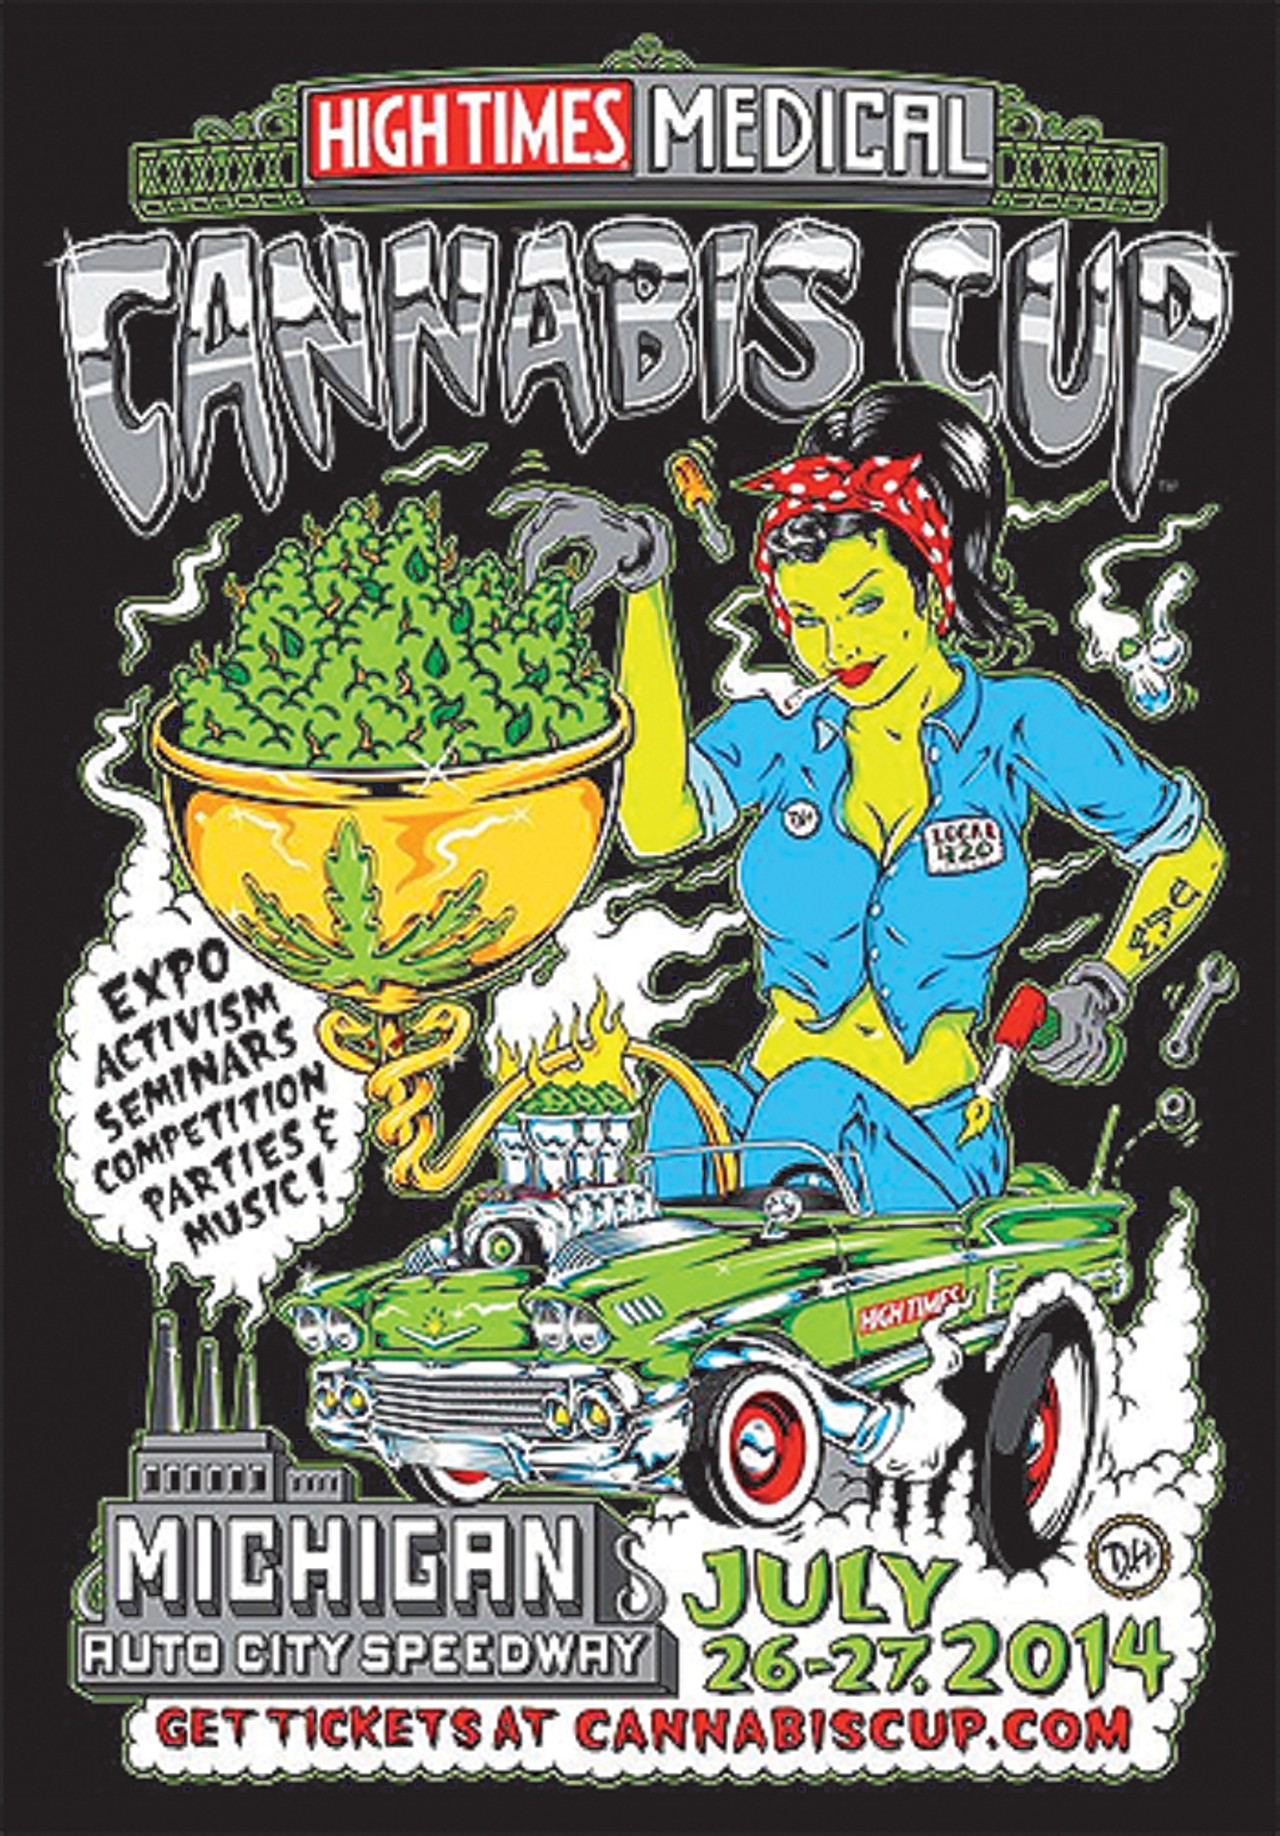 The High Times Cannabis Cup returns to Michigan Culture Detroit